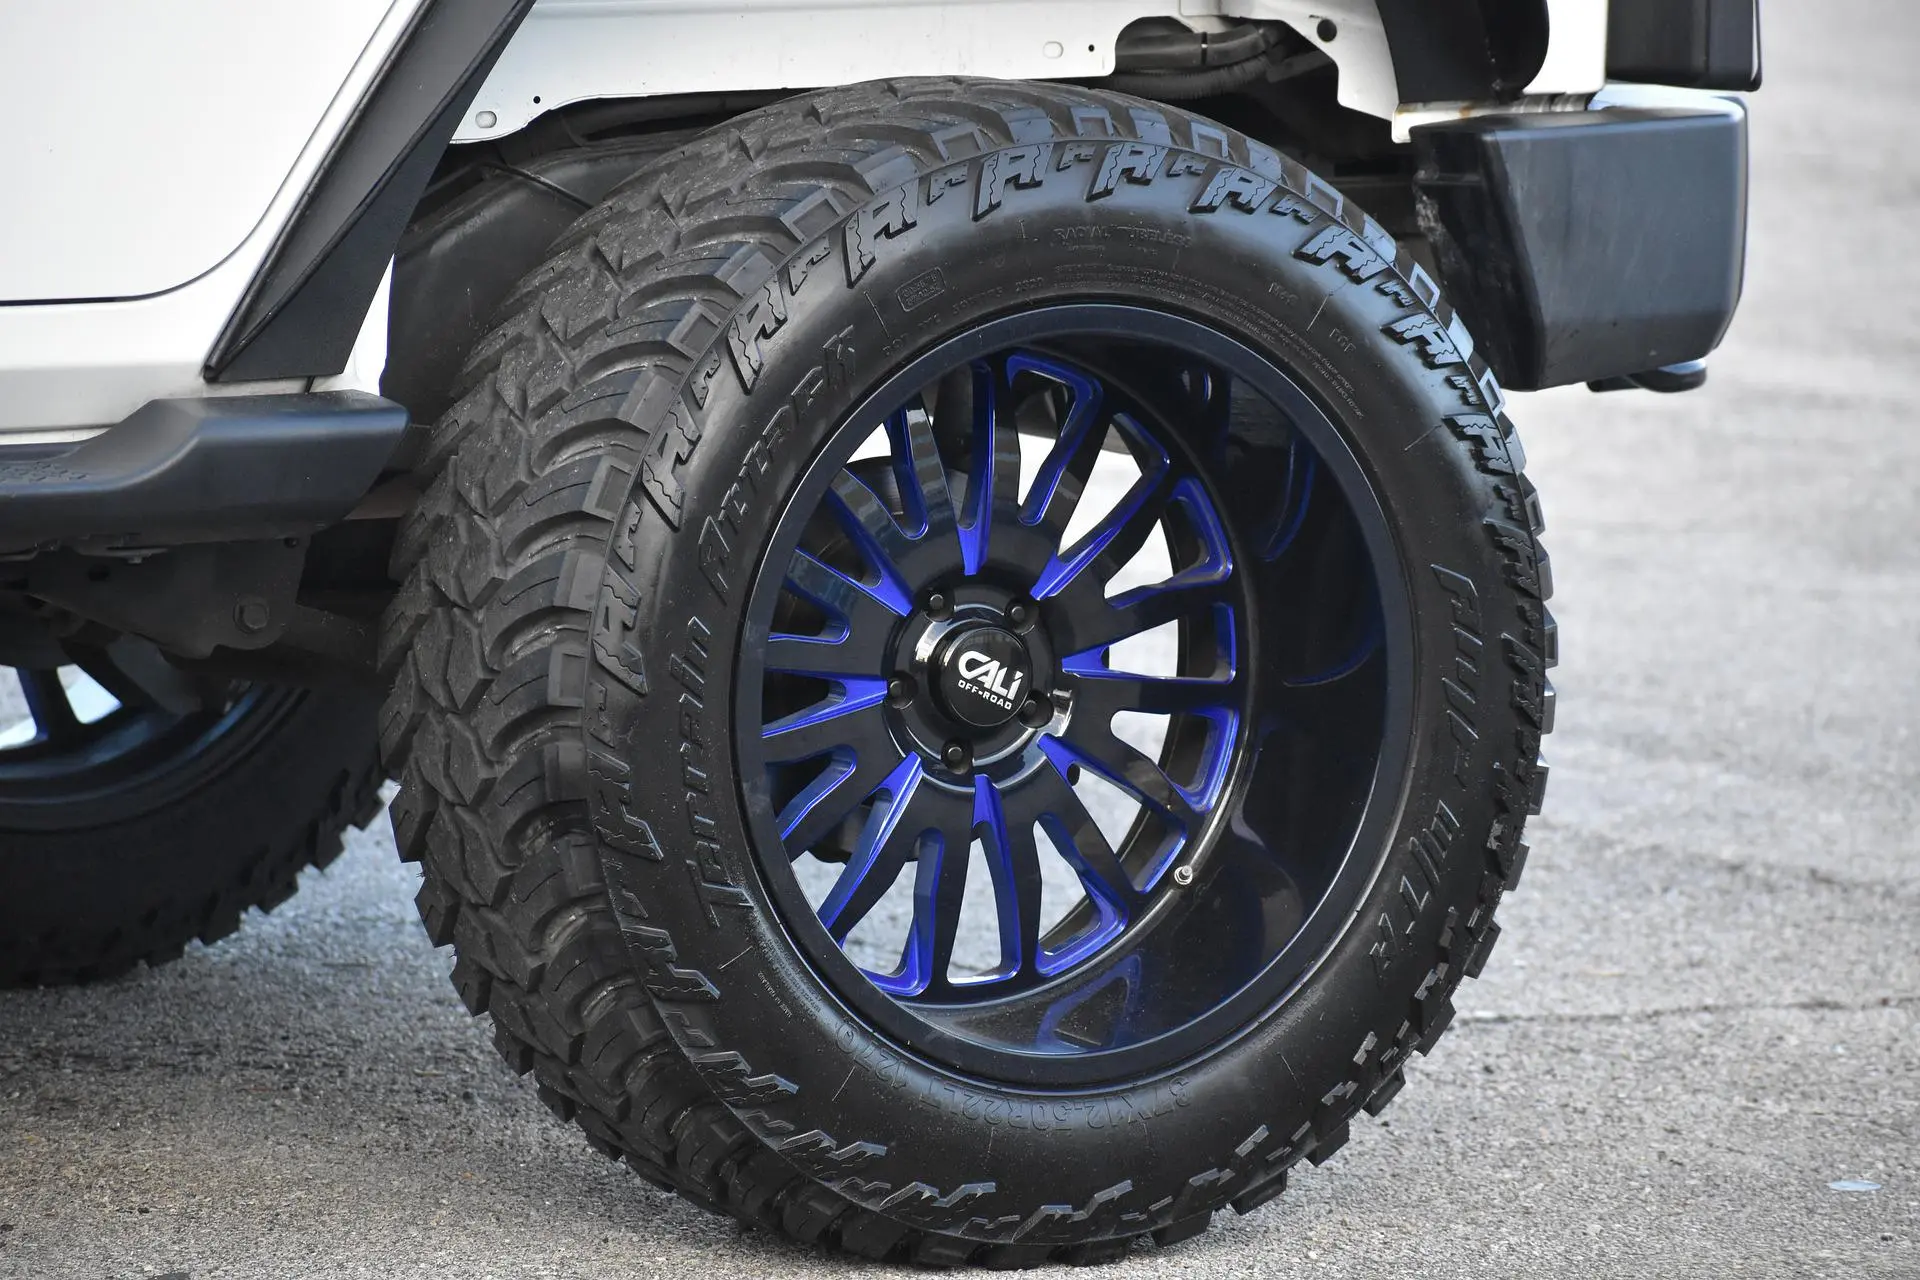 Jeep wrangler wheels with bolt pattern